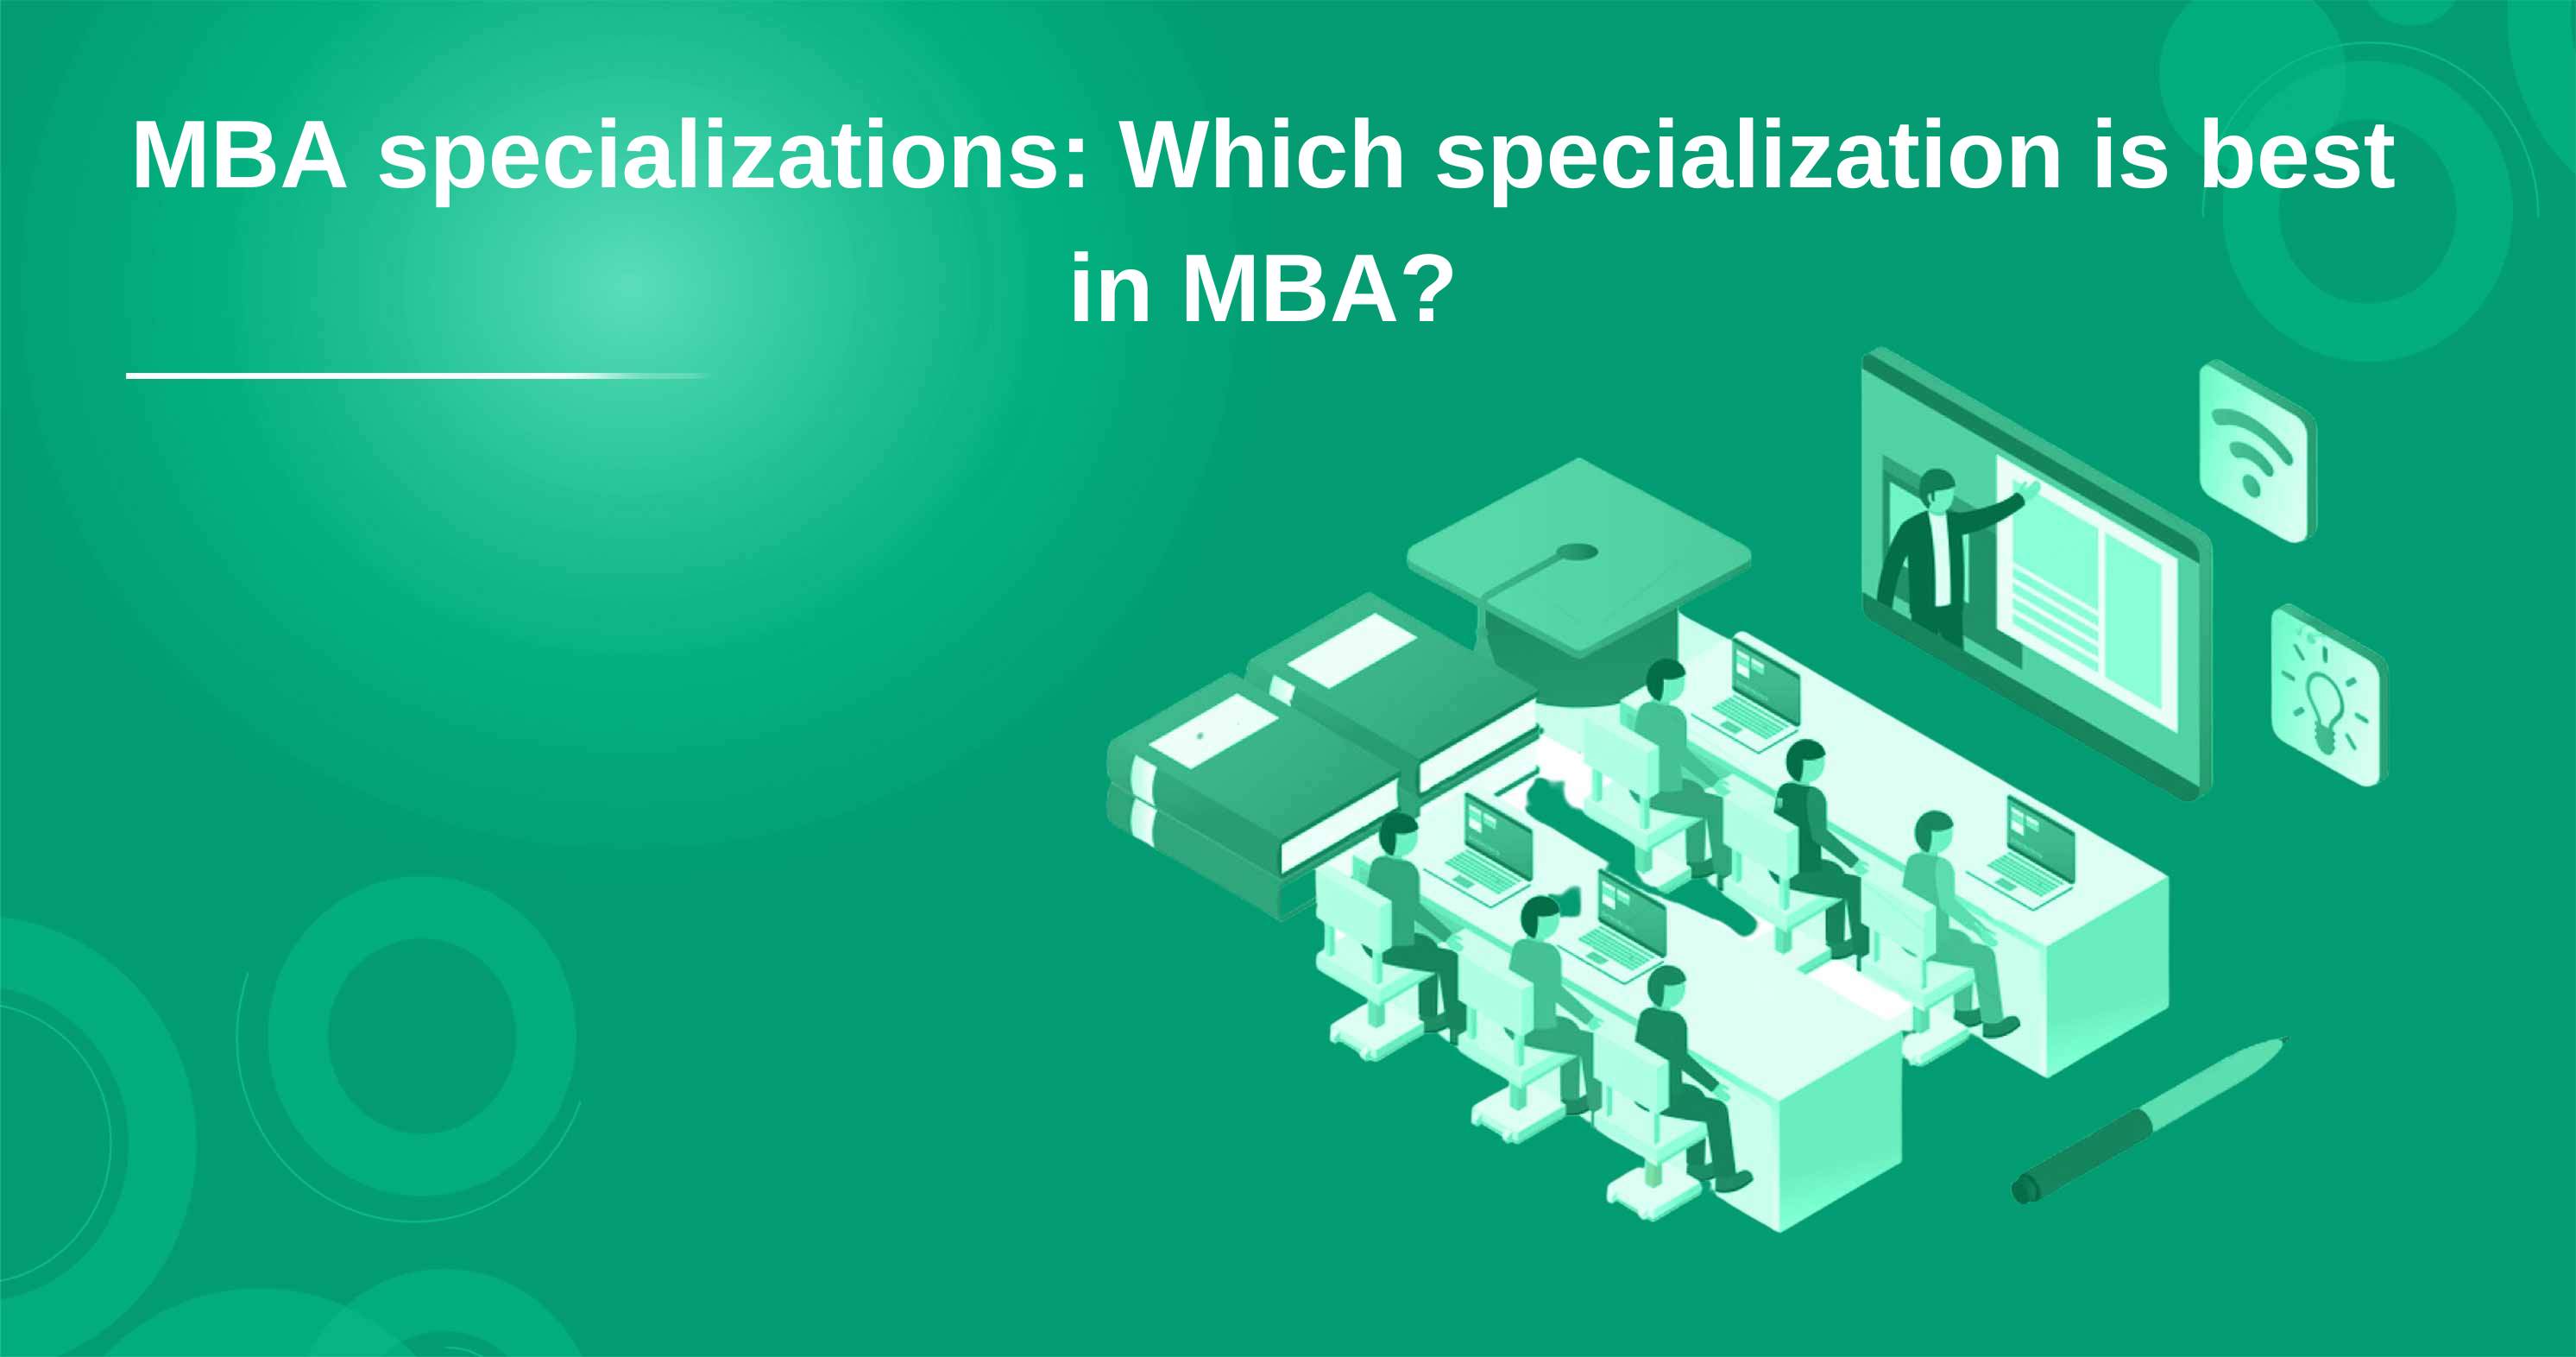 MBA specializations: Which specialization is best in MBA?